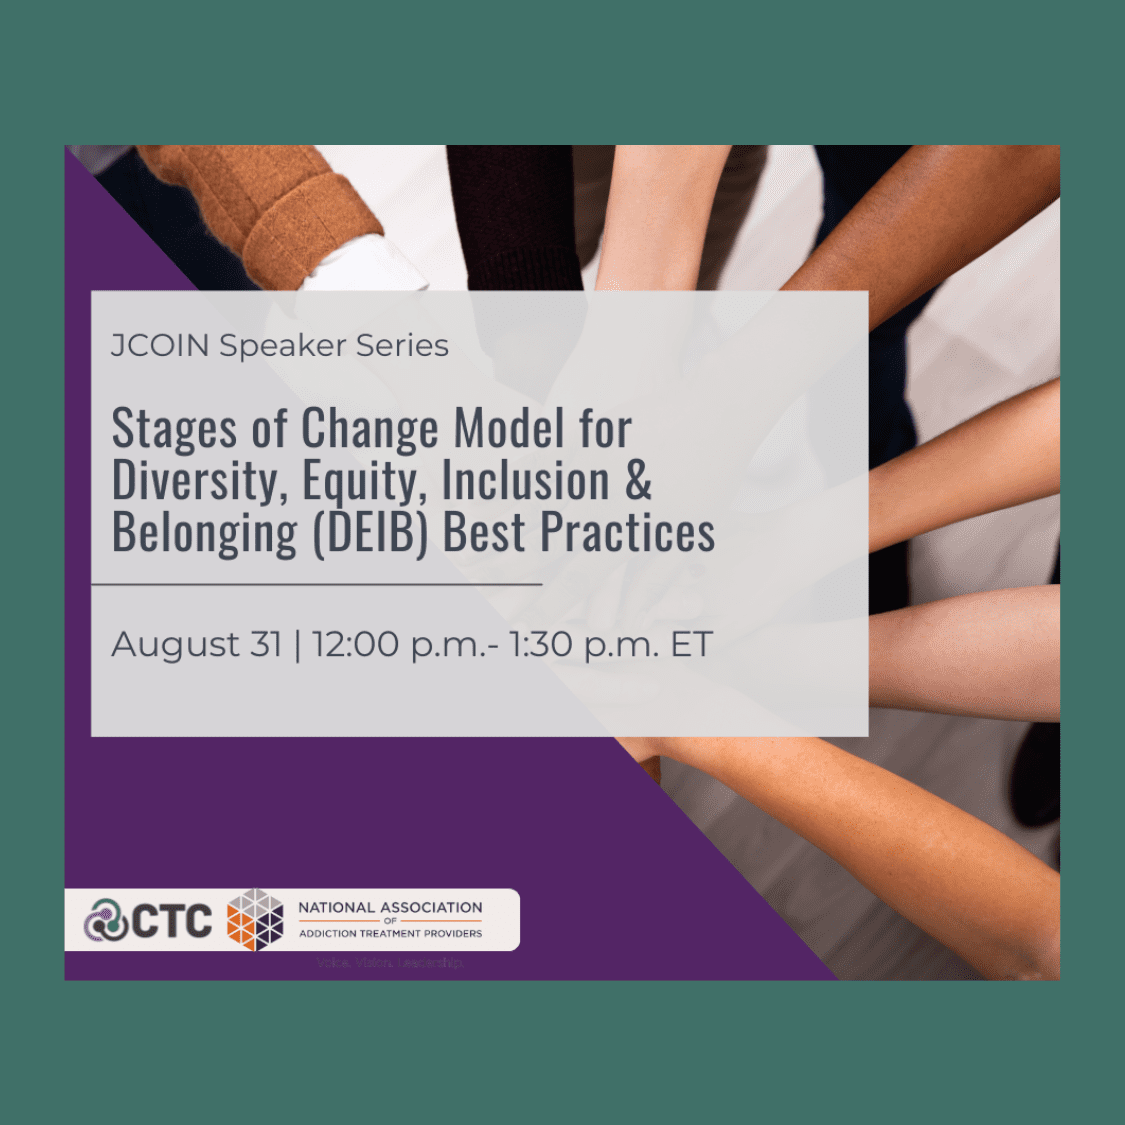 JCOIN Speaker Series: Stages of Change Model for Diversity, Equity, Inclusion & Belonging (DEIB) Best Practices flyer